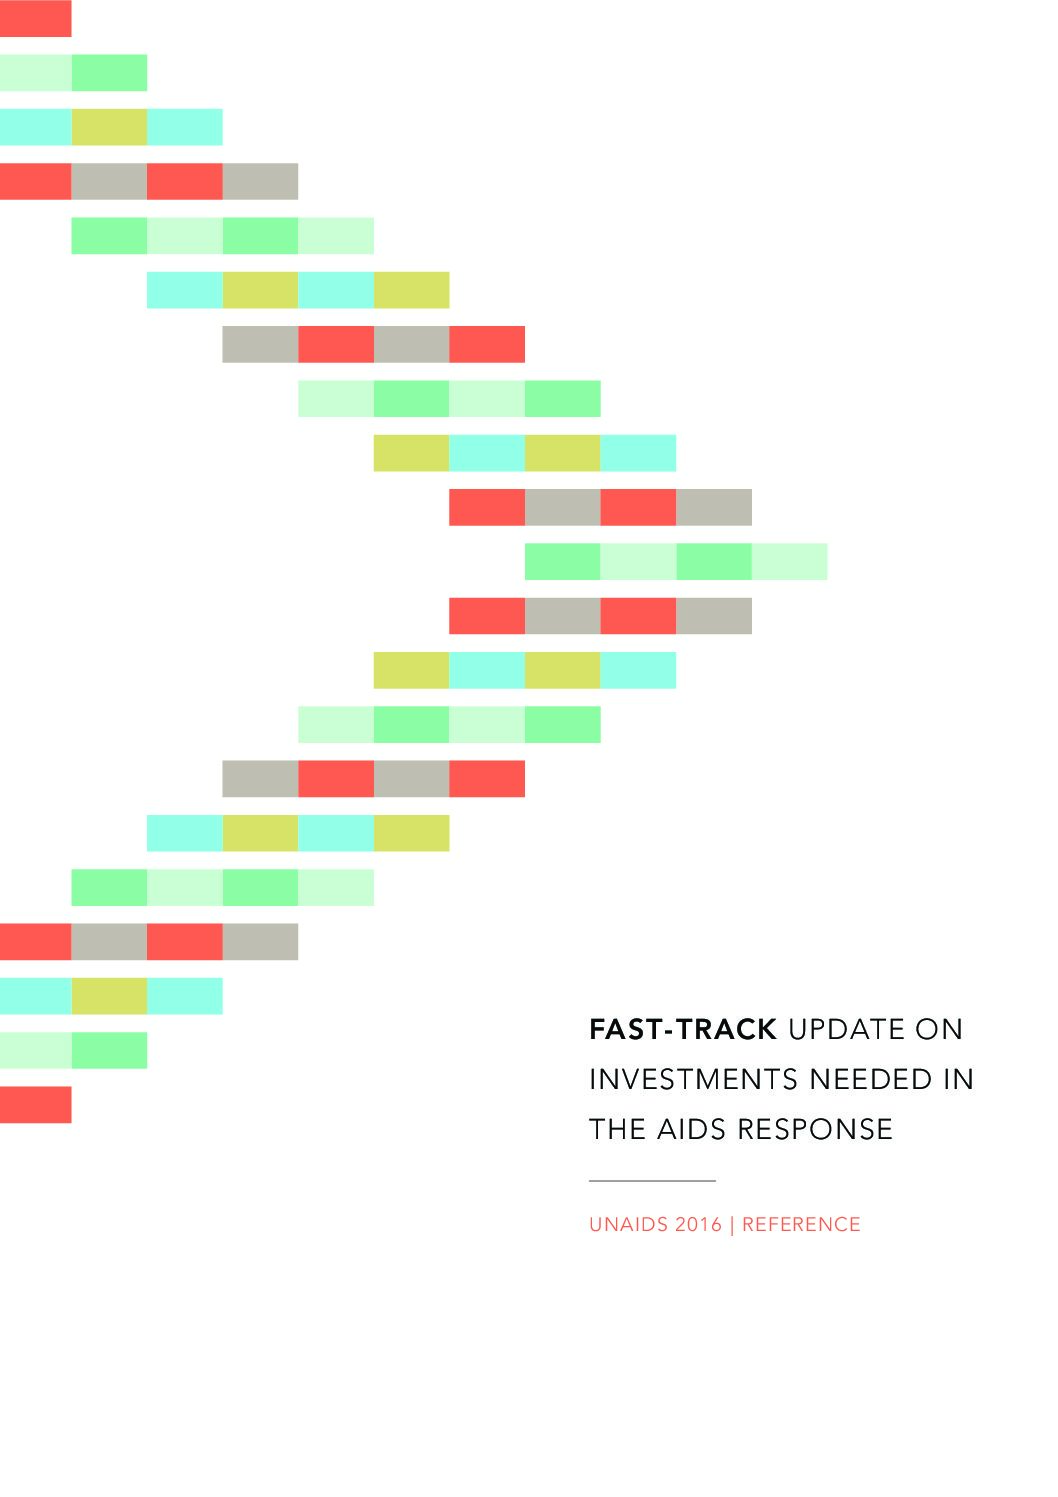 Fast-track update on investments needed in the AIDS responce. UNAIDS 2016. Reference.